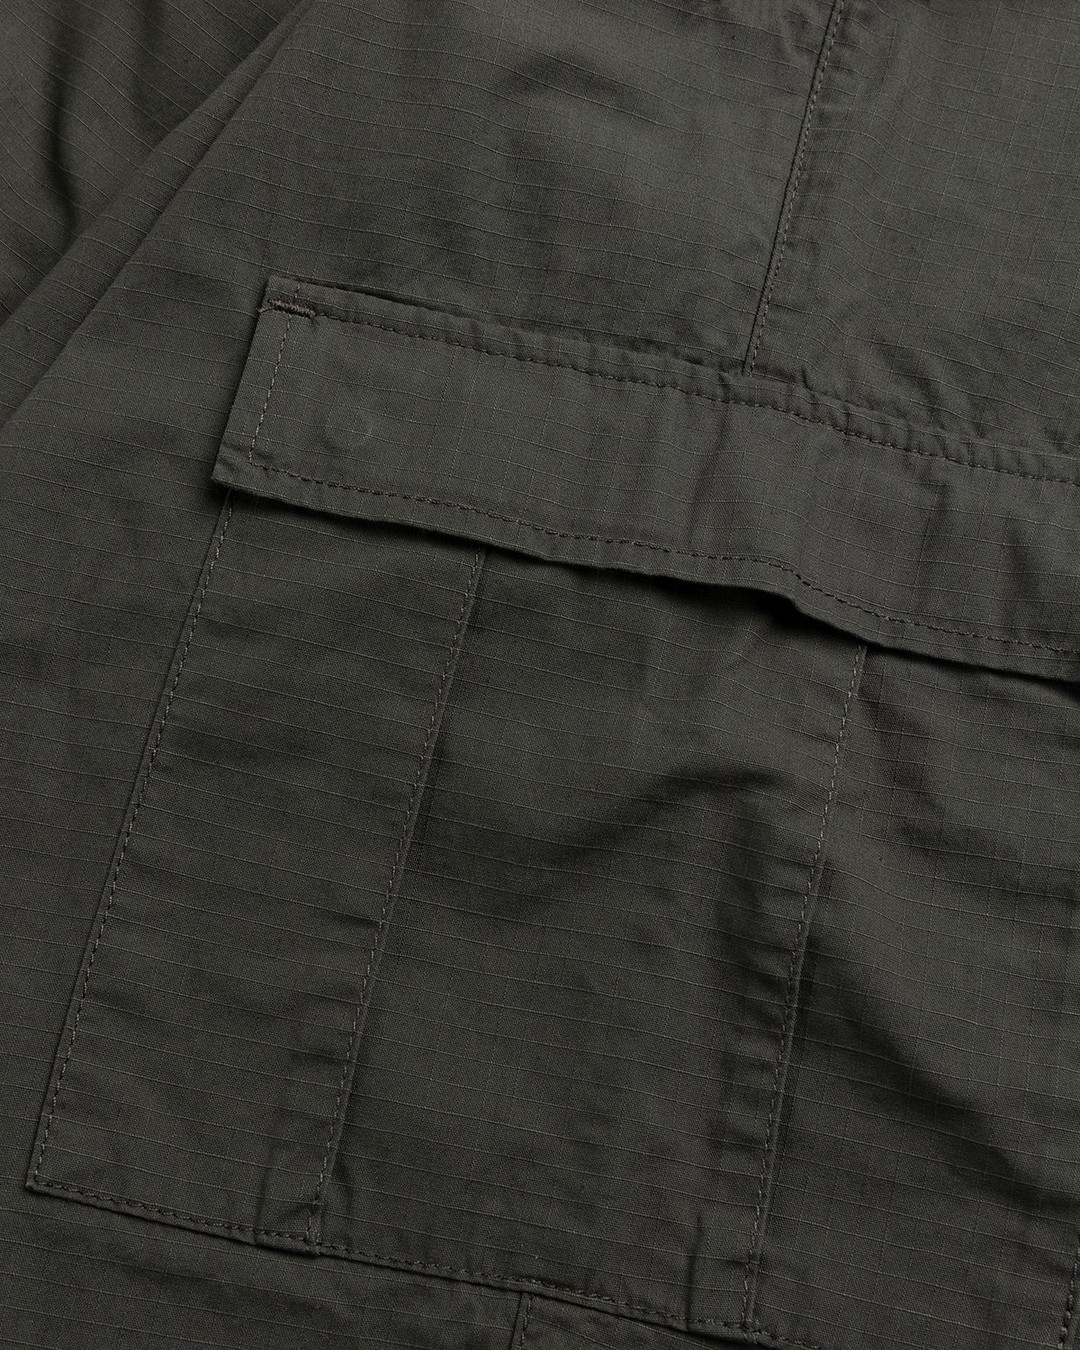 Carhartt WIP – Cargo Jogger Cypress Rinsed - Cargo Pants - Green - Image 4